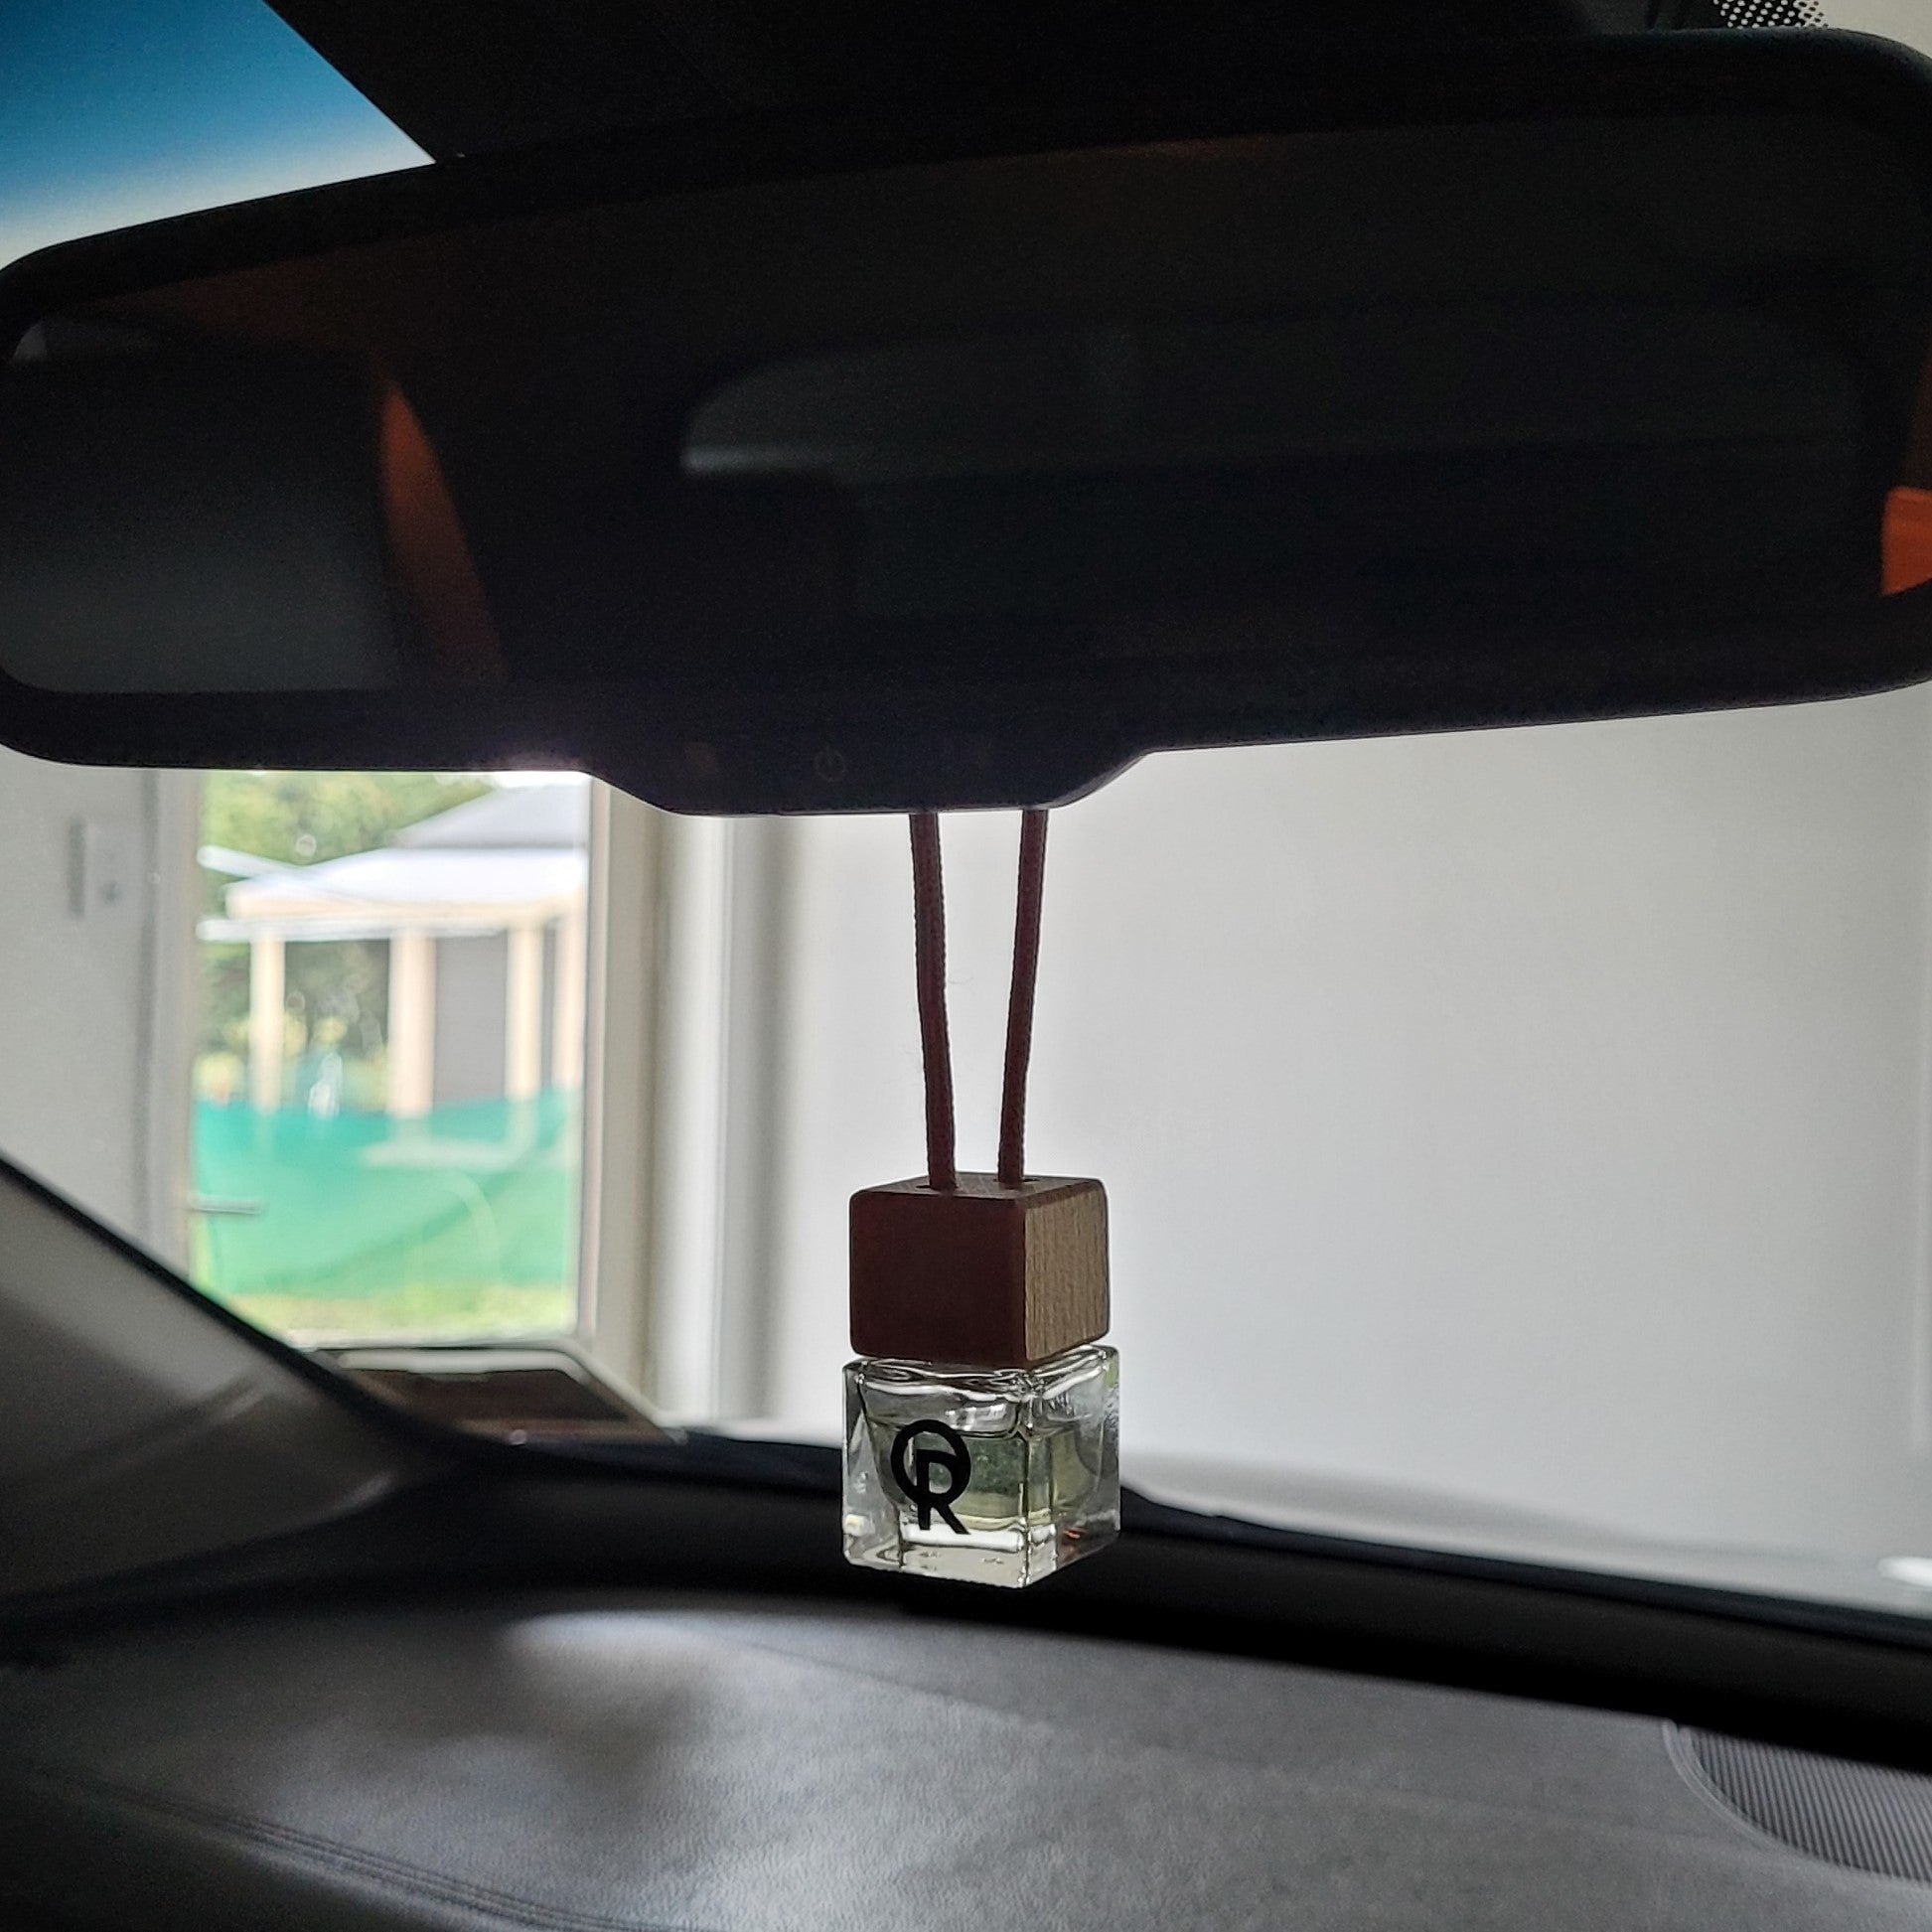 Small air diffuser hanging in the car tied around the mirror, made by Quarry Road.